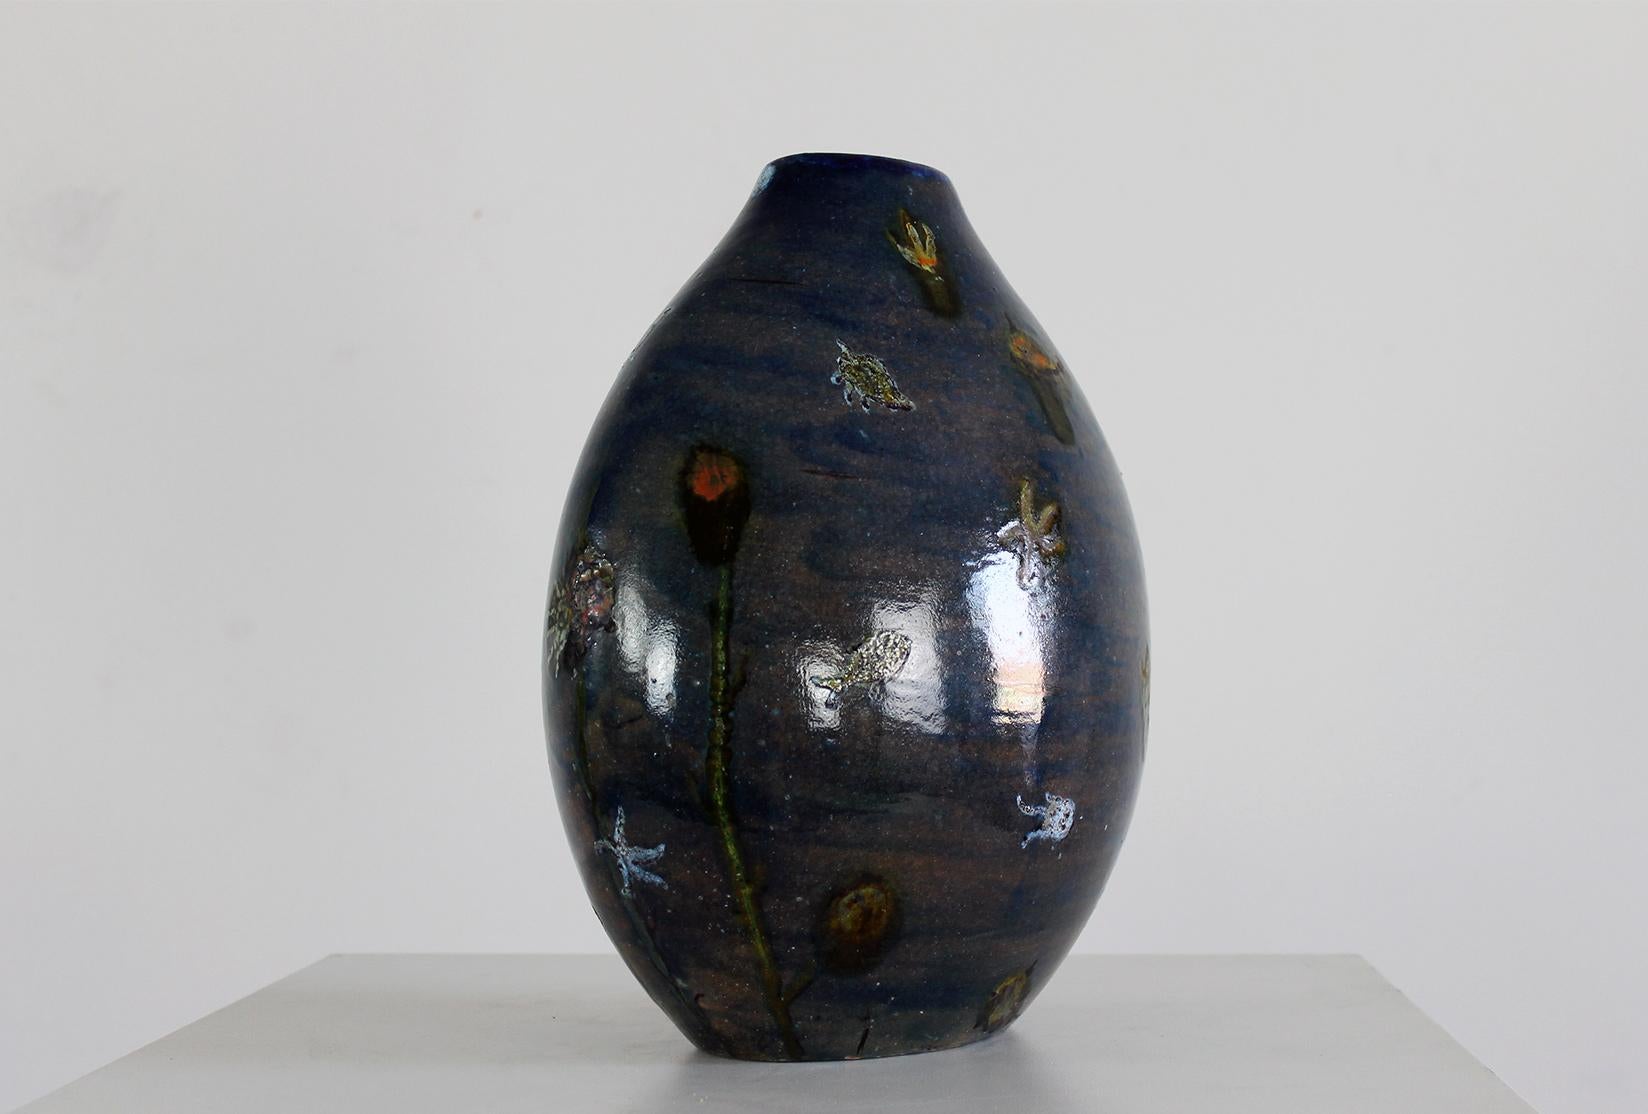 Angelo Ungania Vase in Blue Ceramic with Marine Decorations 1940s Italy In Good Condition For Sale In Montecatini Terme, IT